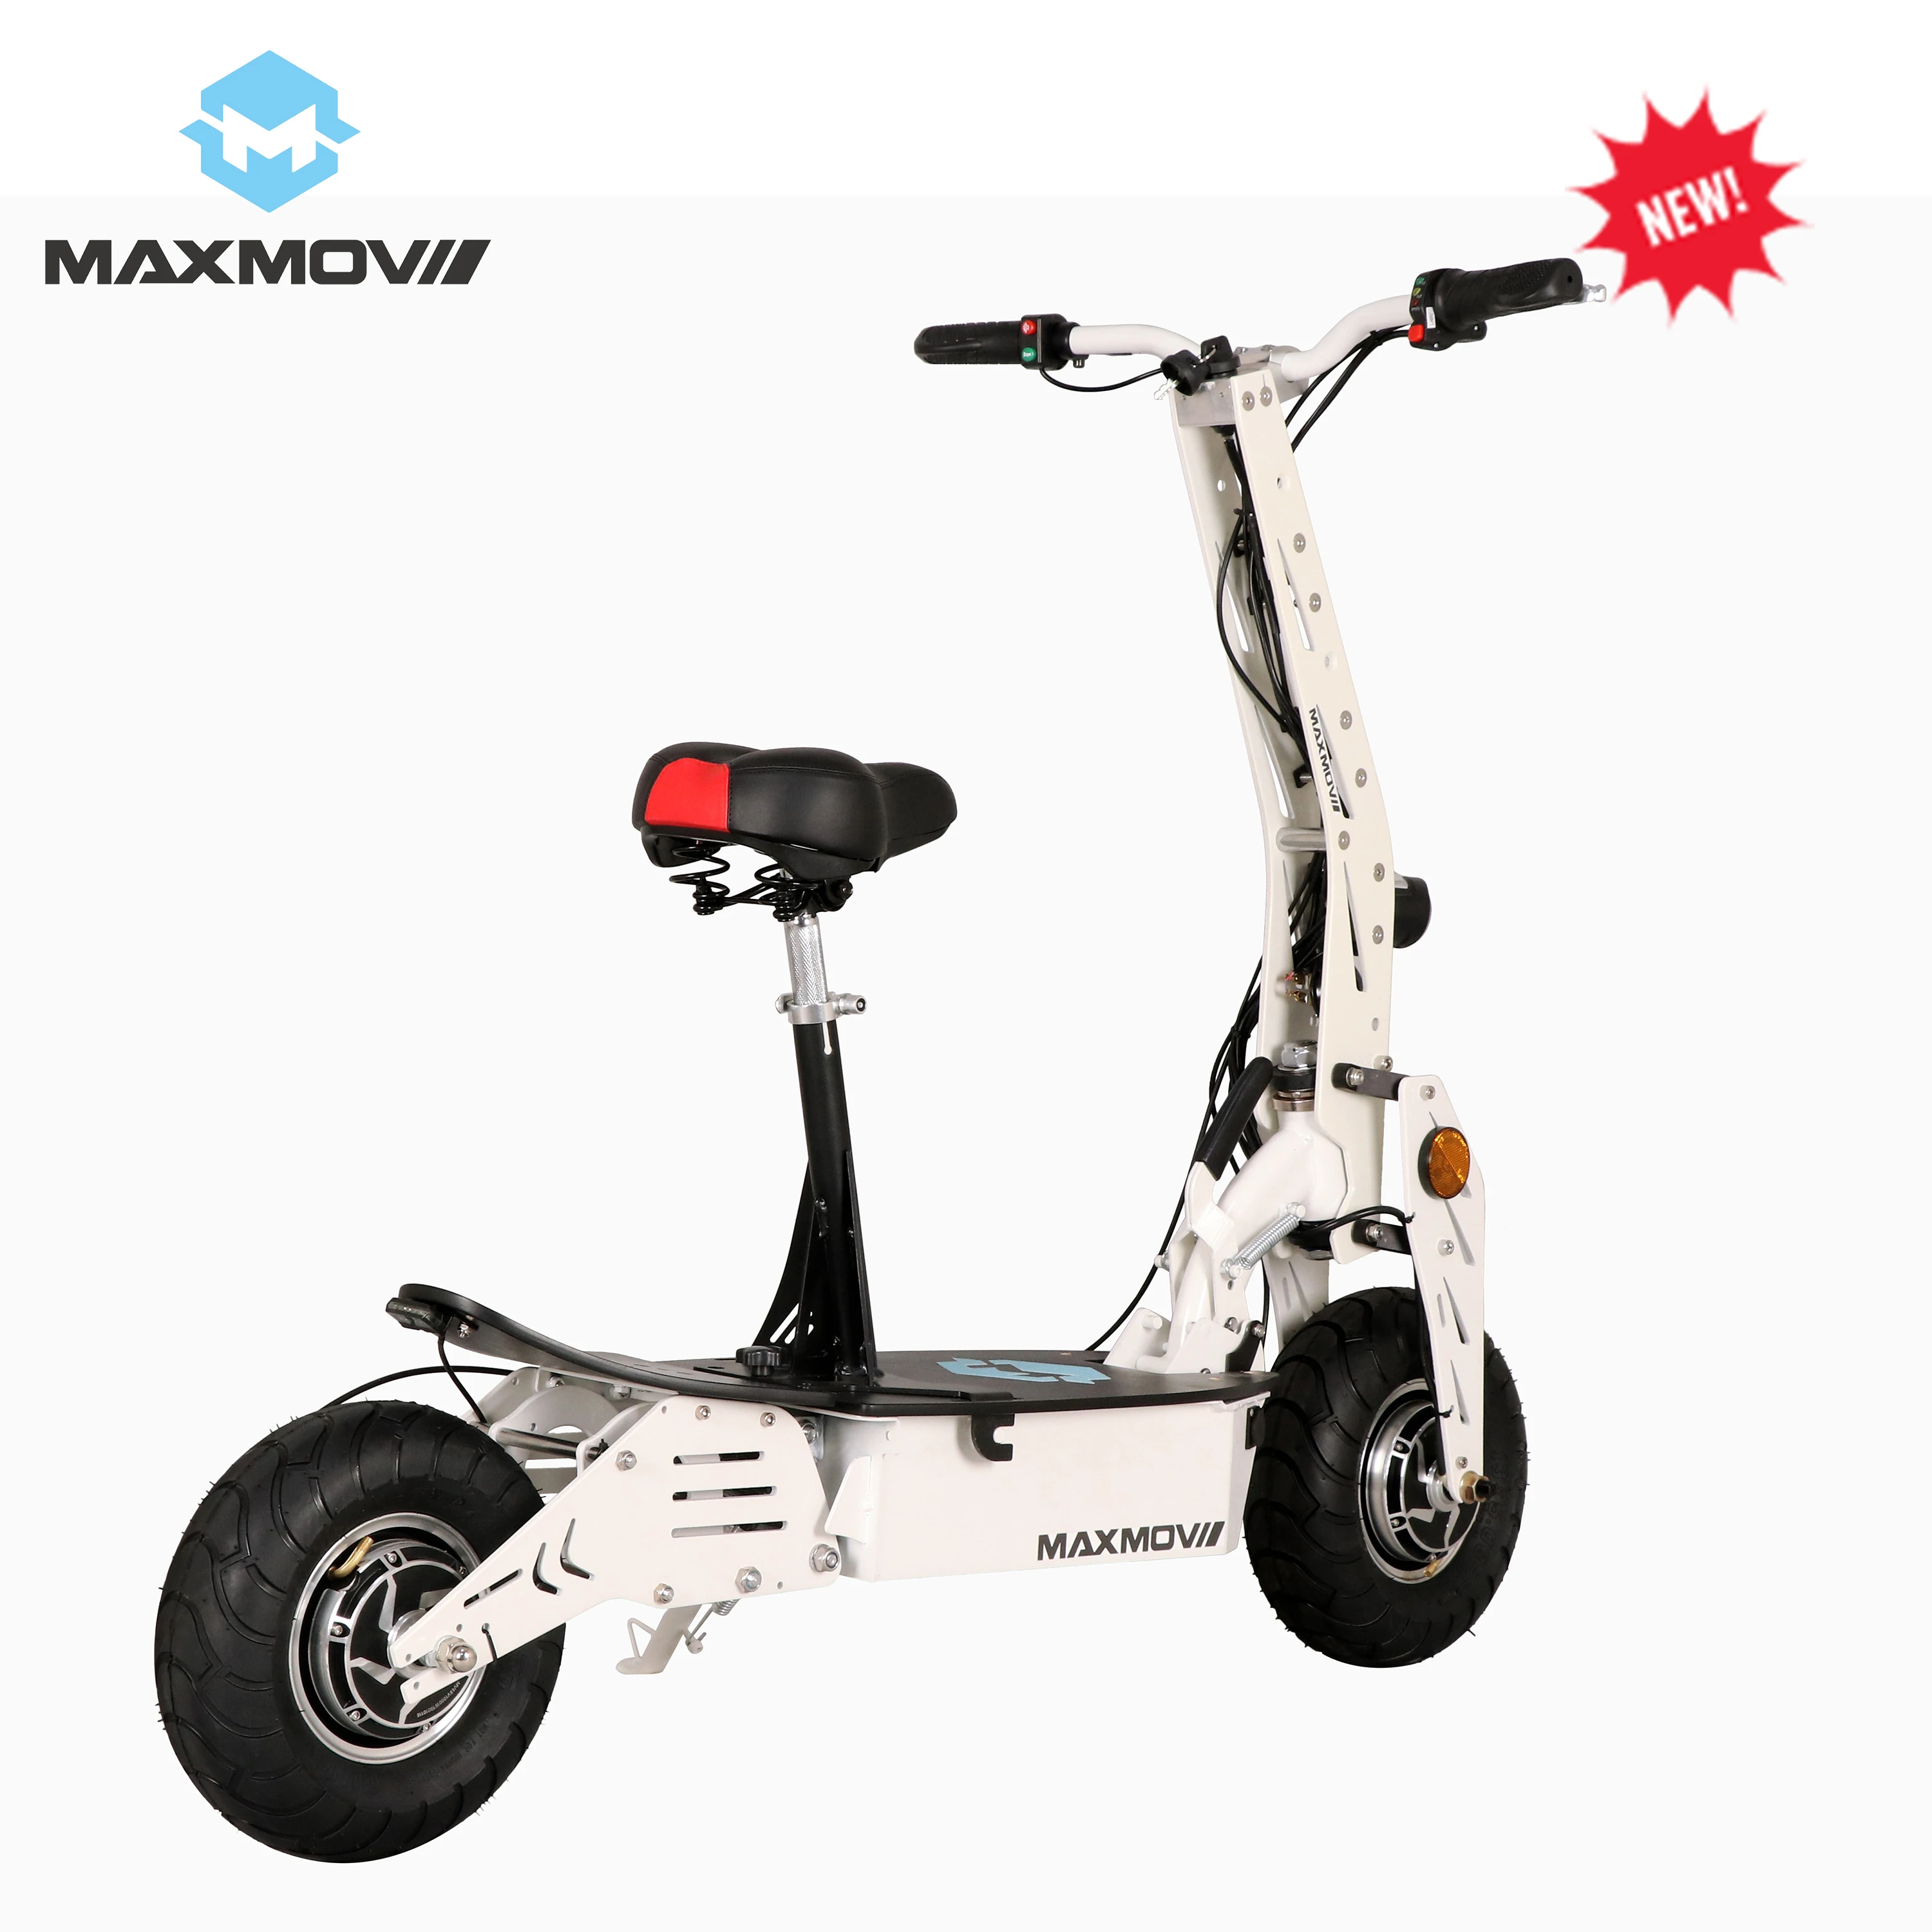 Best 2019 Top Seller 2000W 48V 20AH Lithium Battery Powerful Citycoco Electric Motorcycle Scooter with 50KM/h Max Speed 14